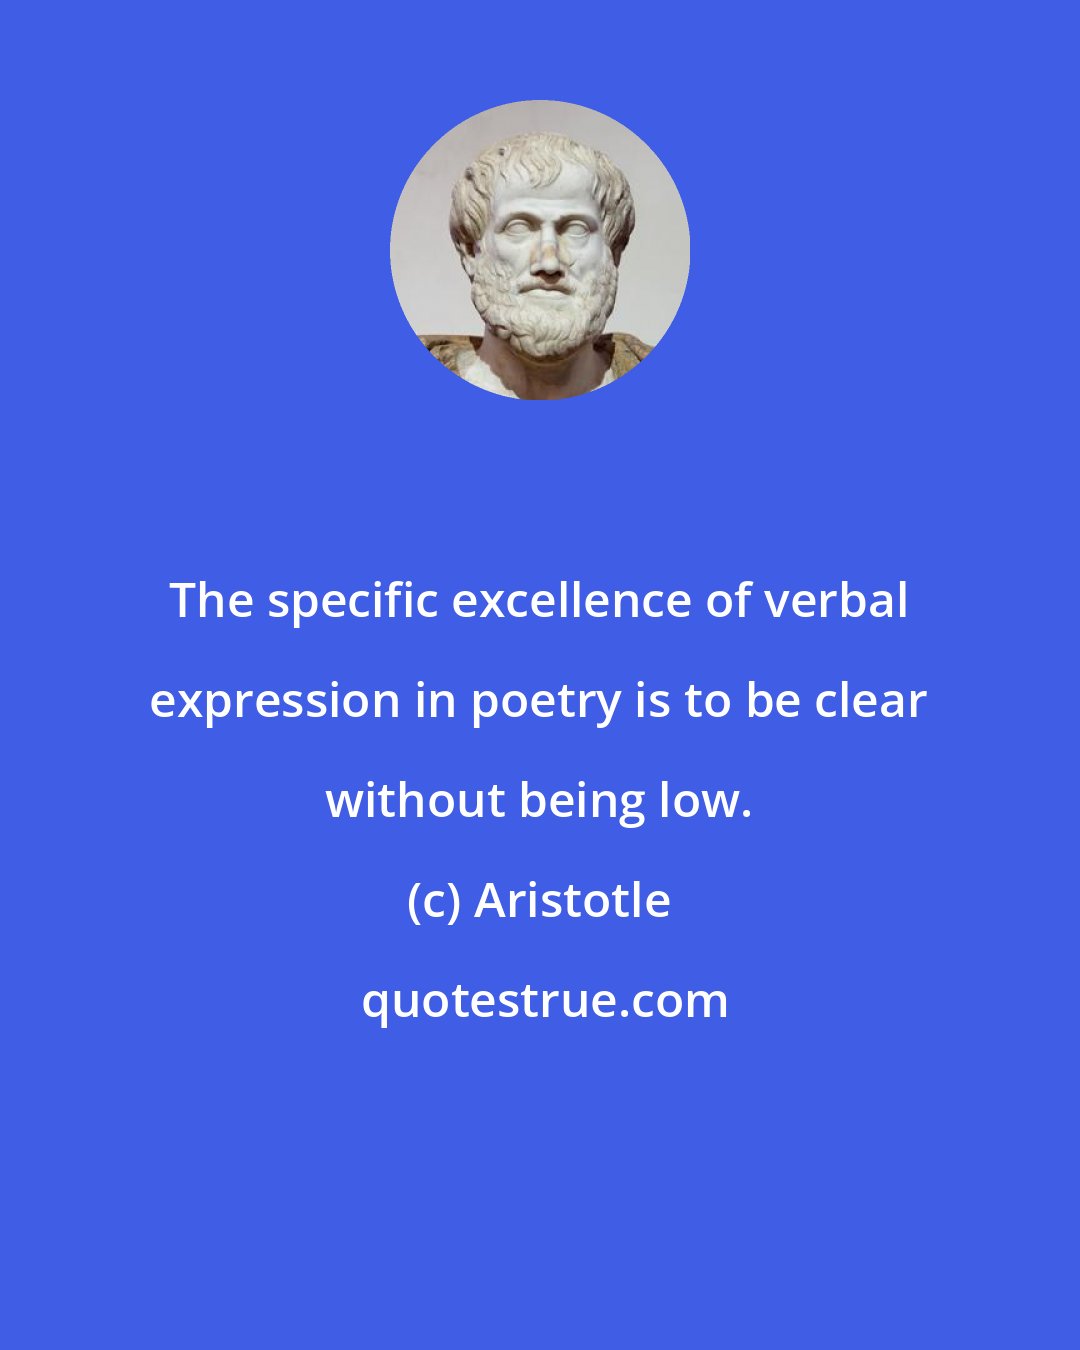 Aristotle: The specific excellence of verbal expression in poetry is to be clear without being low.